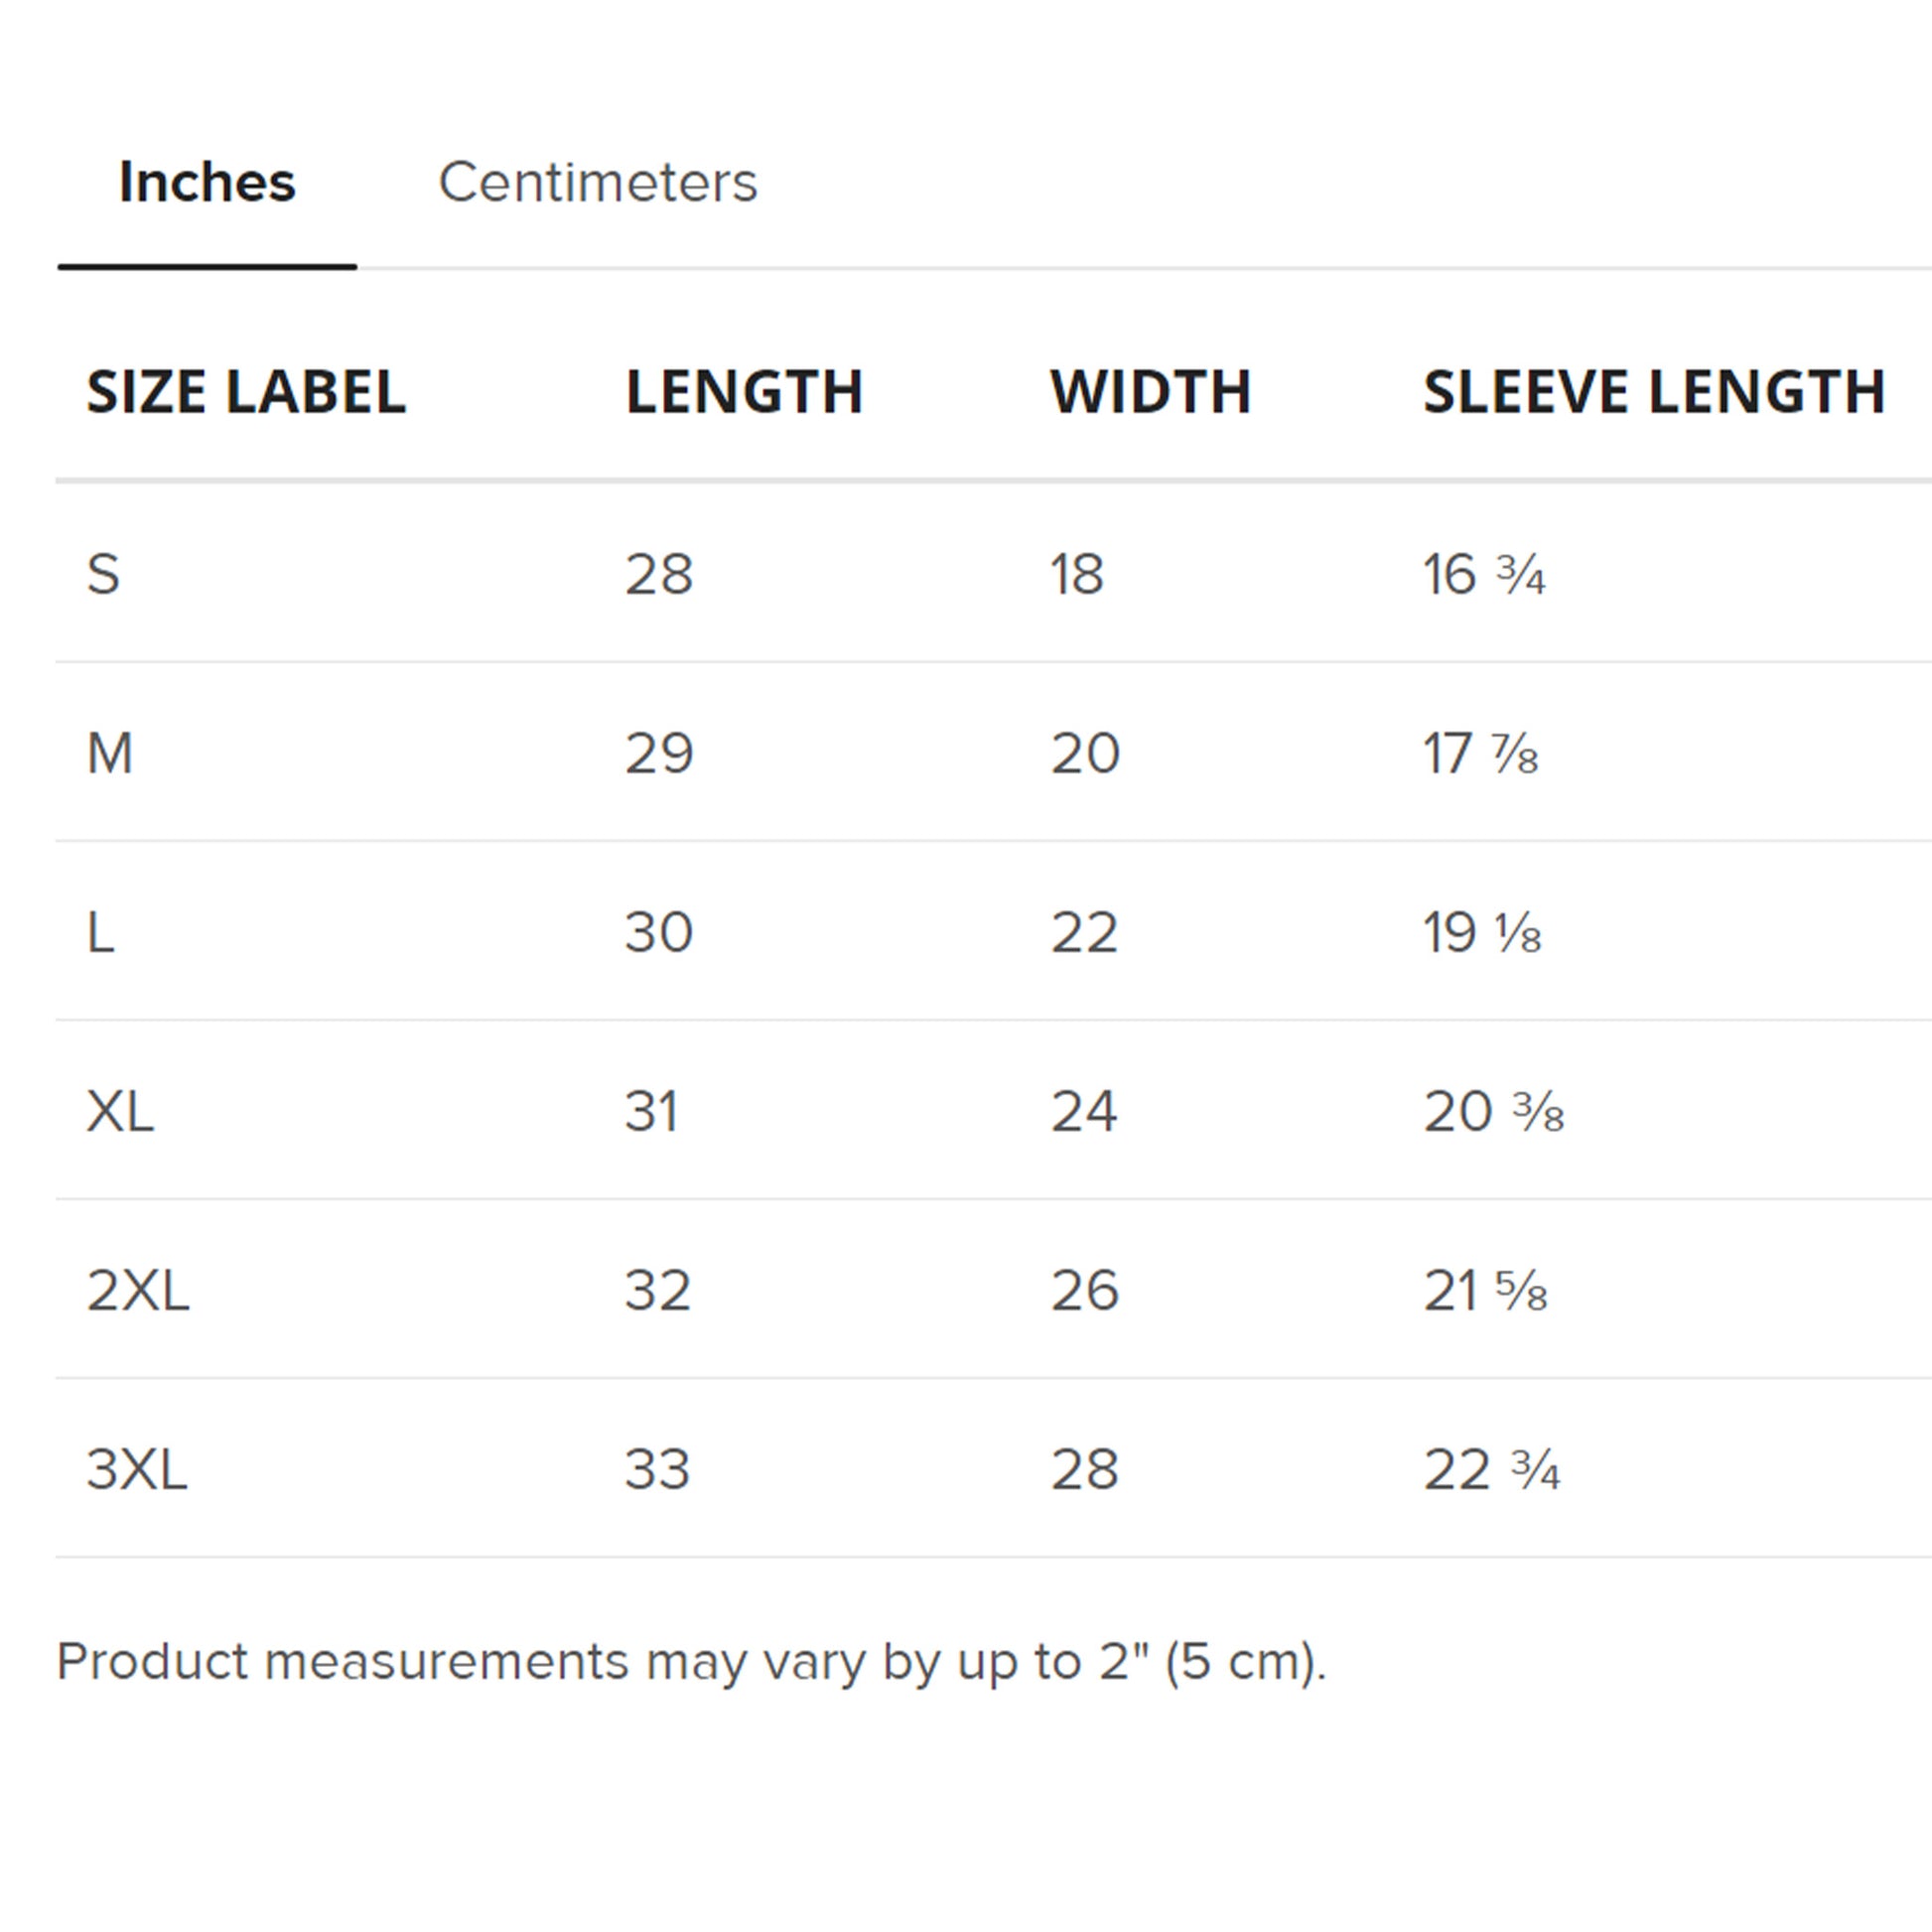 INches of product measurement for unisex SPARS Logomark Basic T-shirt